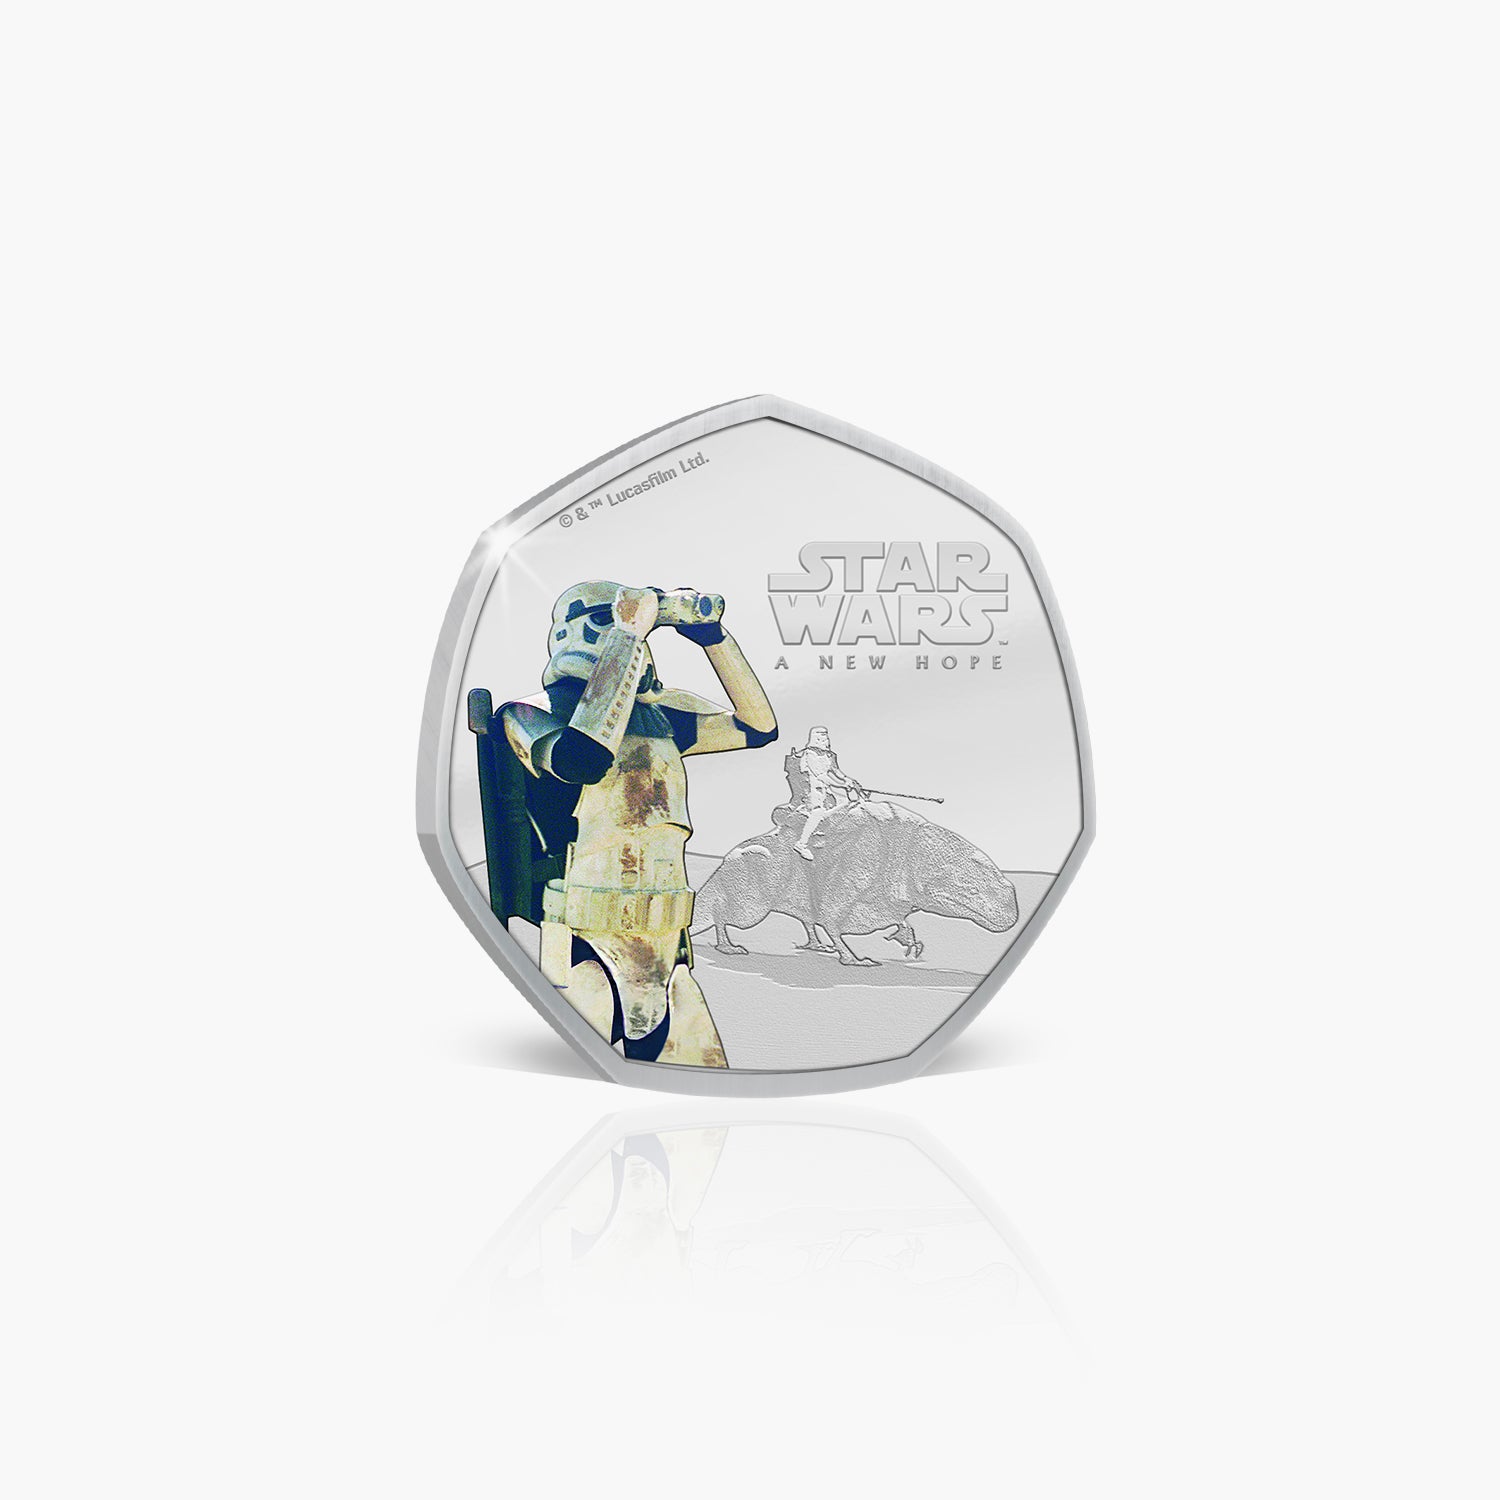 A New Hope - Look Sir, Droids Silver Plated Coin